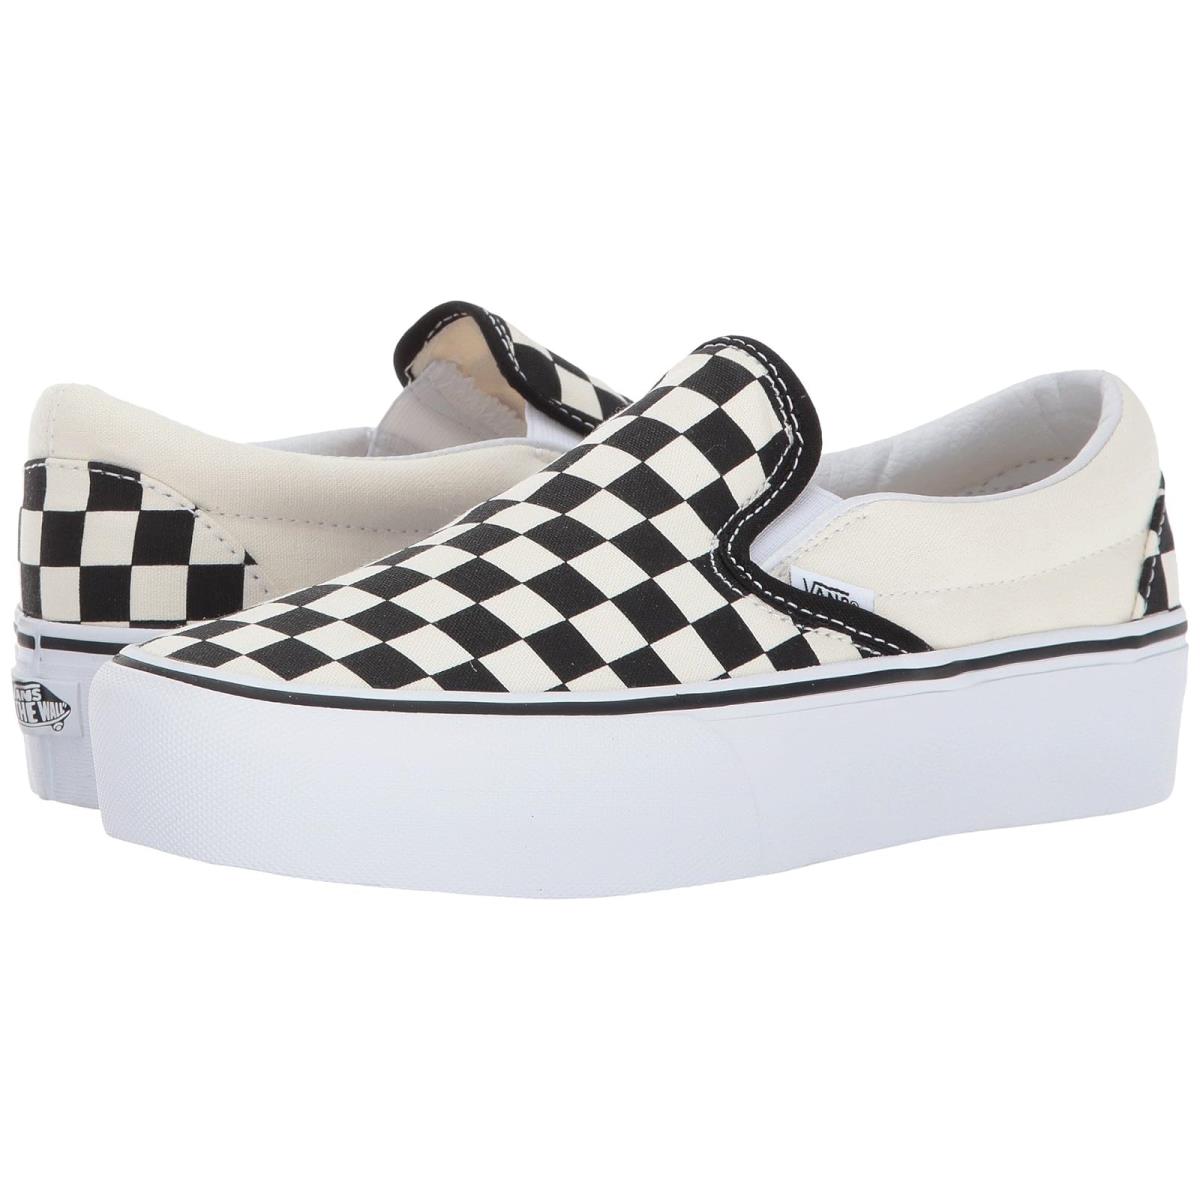 Unisex Sneakers Athletic Shoes Vans Classic Slip-on Platform Black and White Checker/White